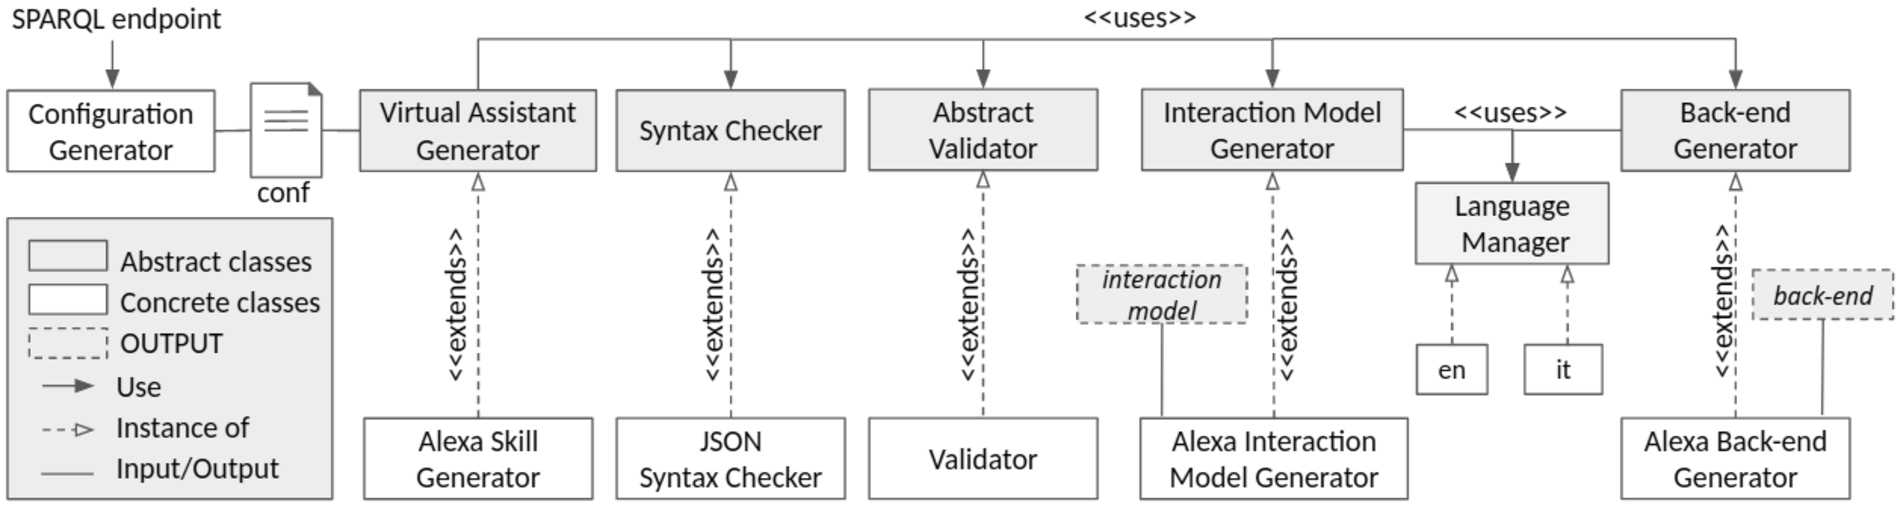 Architecture of the proposed generator of question answering over knowledge graphs by virtual assistants.